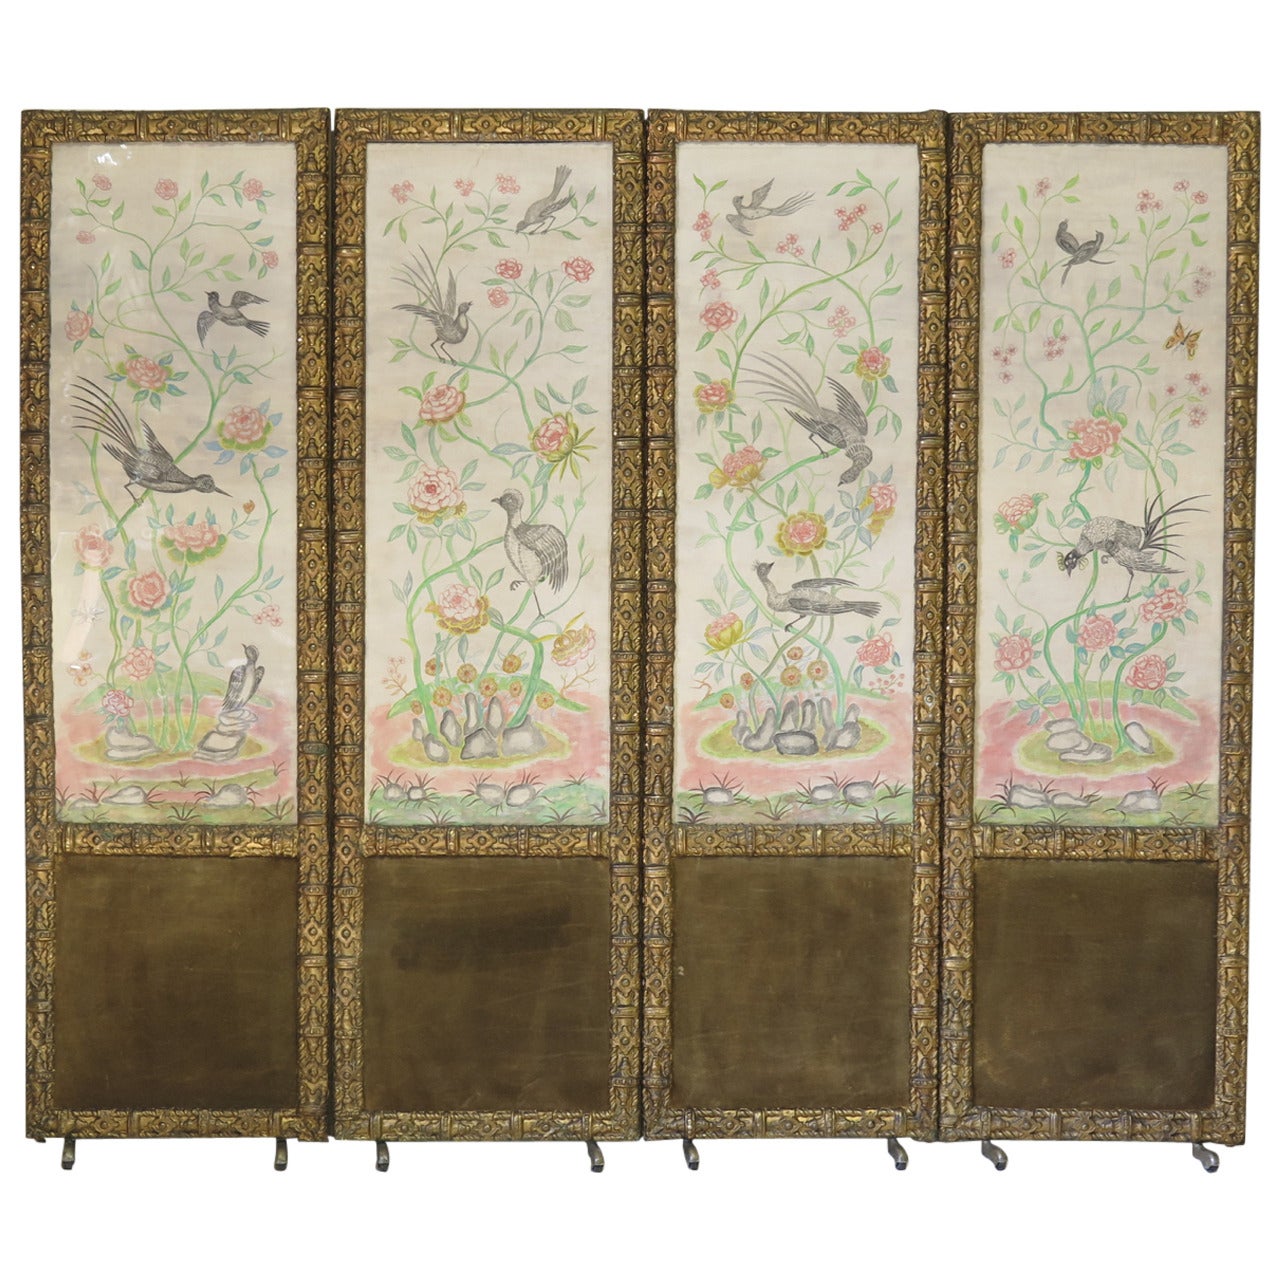 Four-Panel Screen with Painted Birds and Butterflies, France Early 1900s